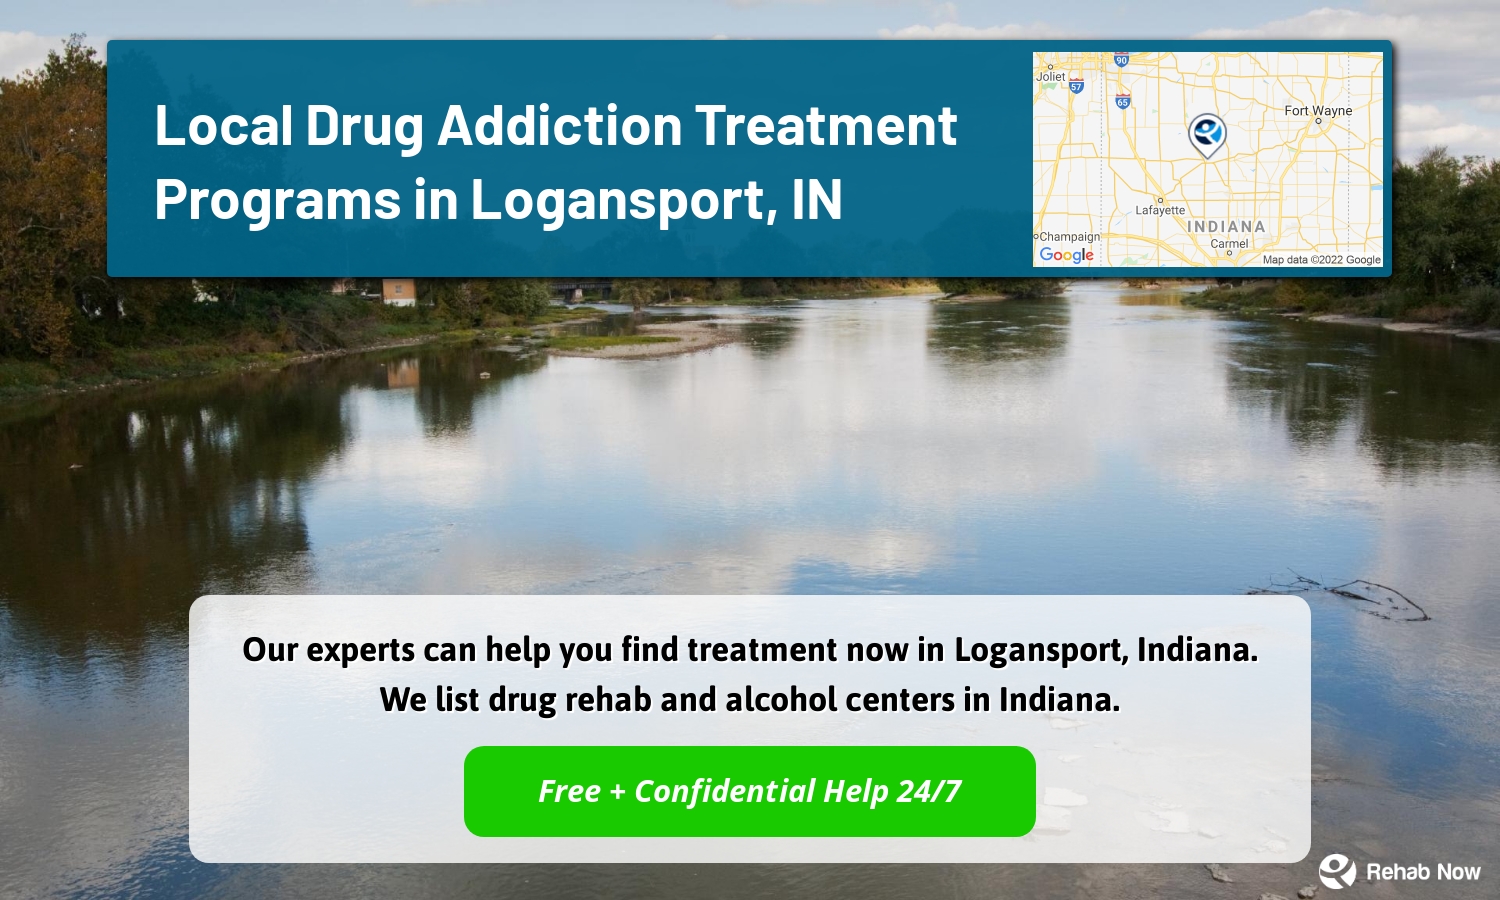 Our experts can help you find treatment now in Logansport, Indiana. We list drug rehab and alcohol centers in Indiana.